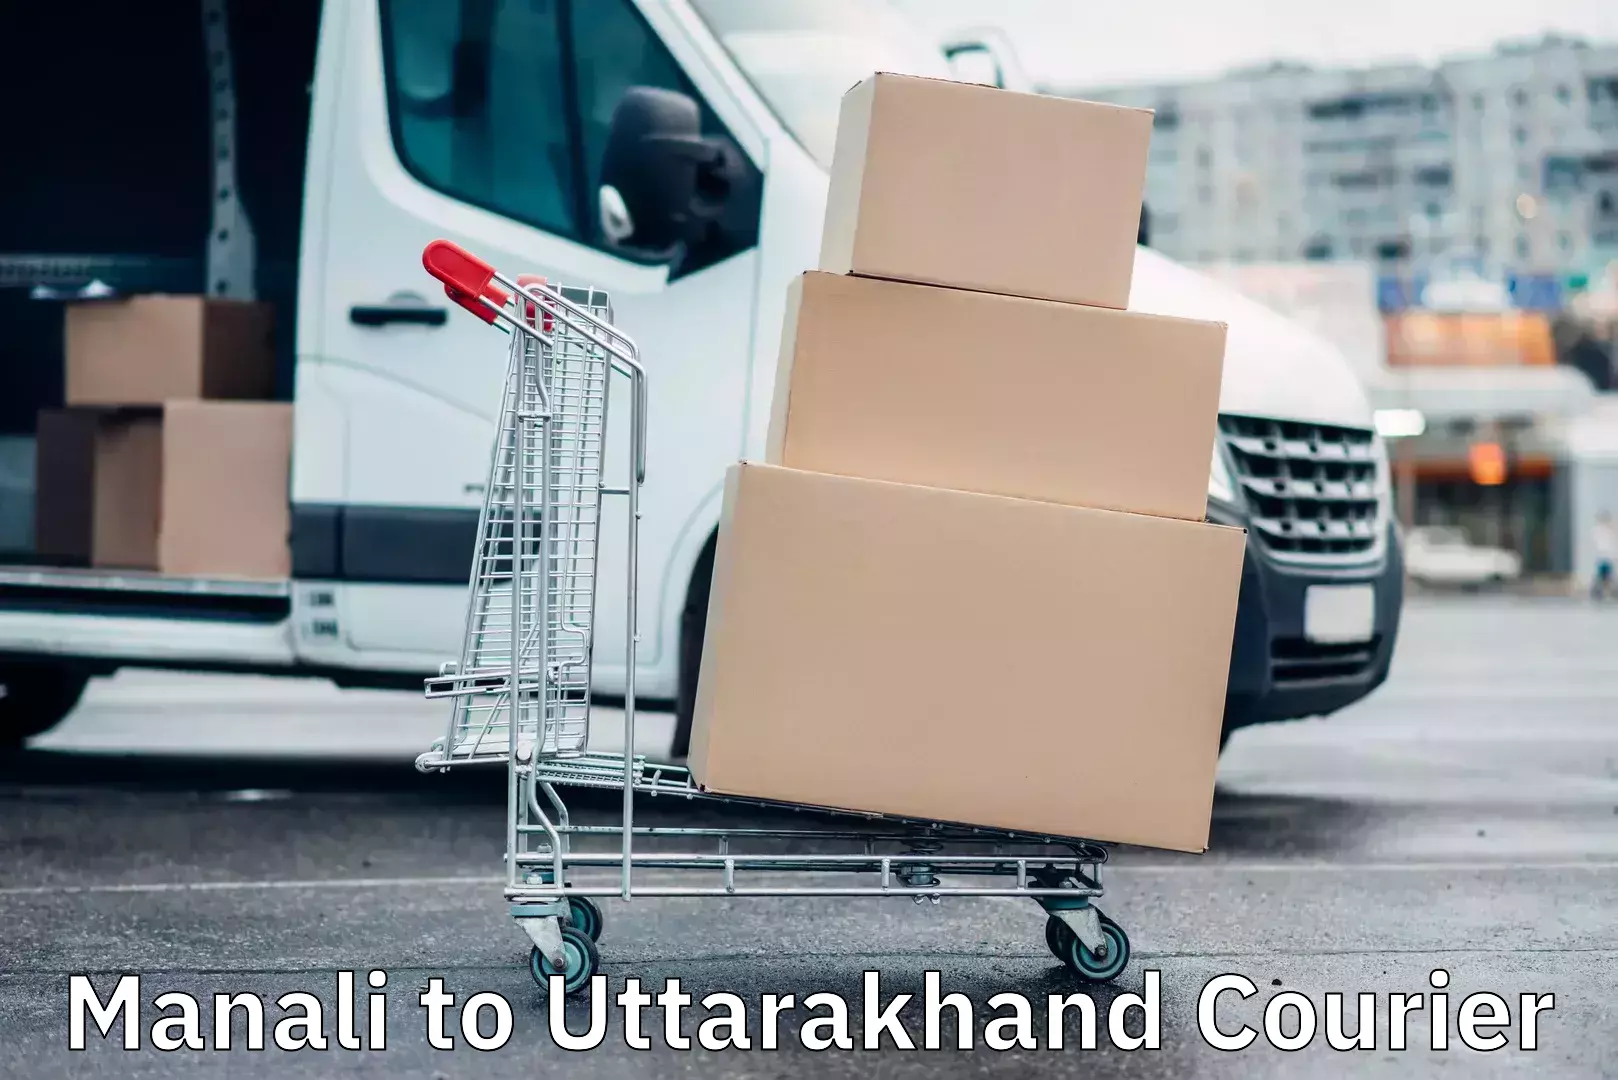 Package delivery network Manali to Uttarakhand